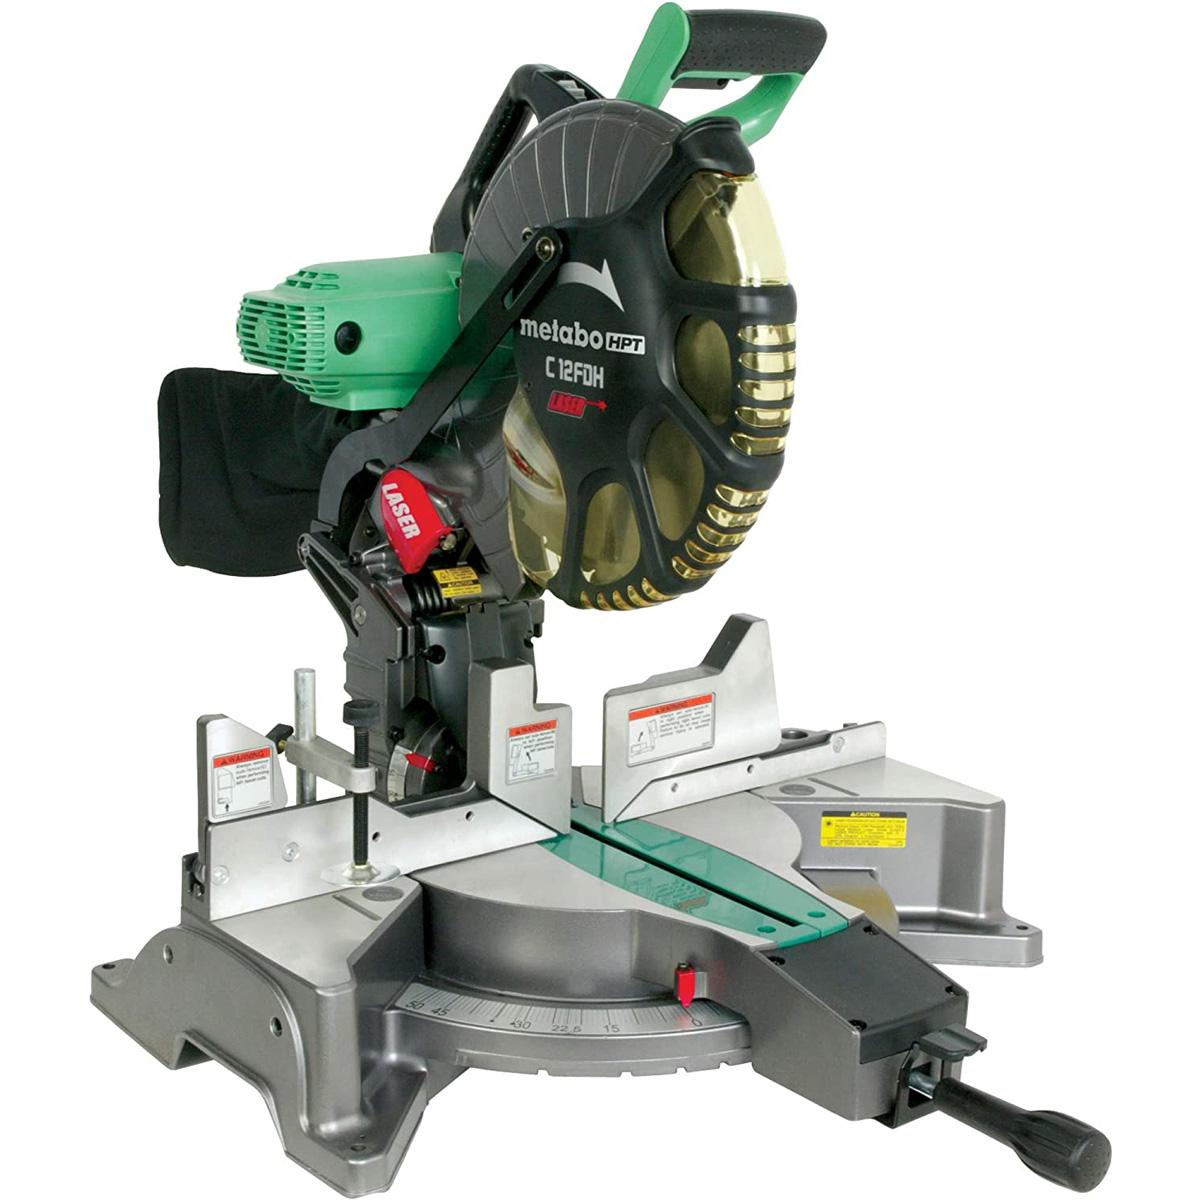 Metabo HPT 12in 15A Dual Bevel Compound Miter Saw for $179 Shipped